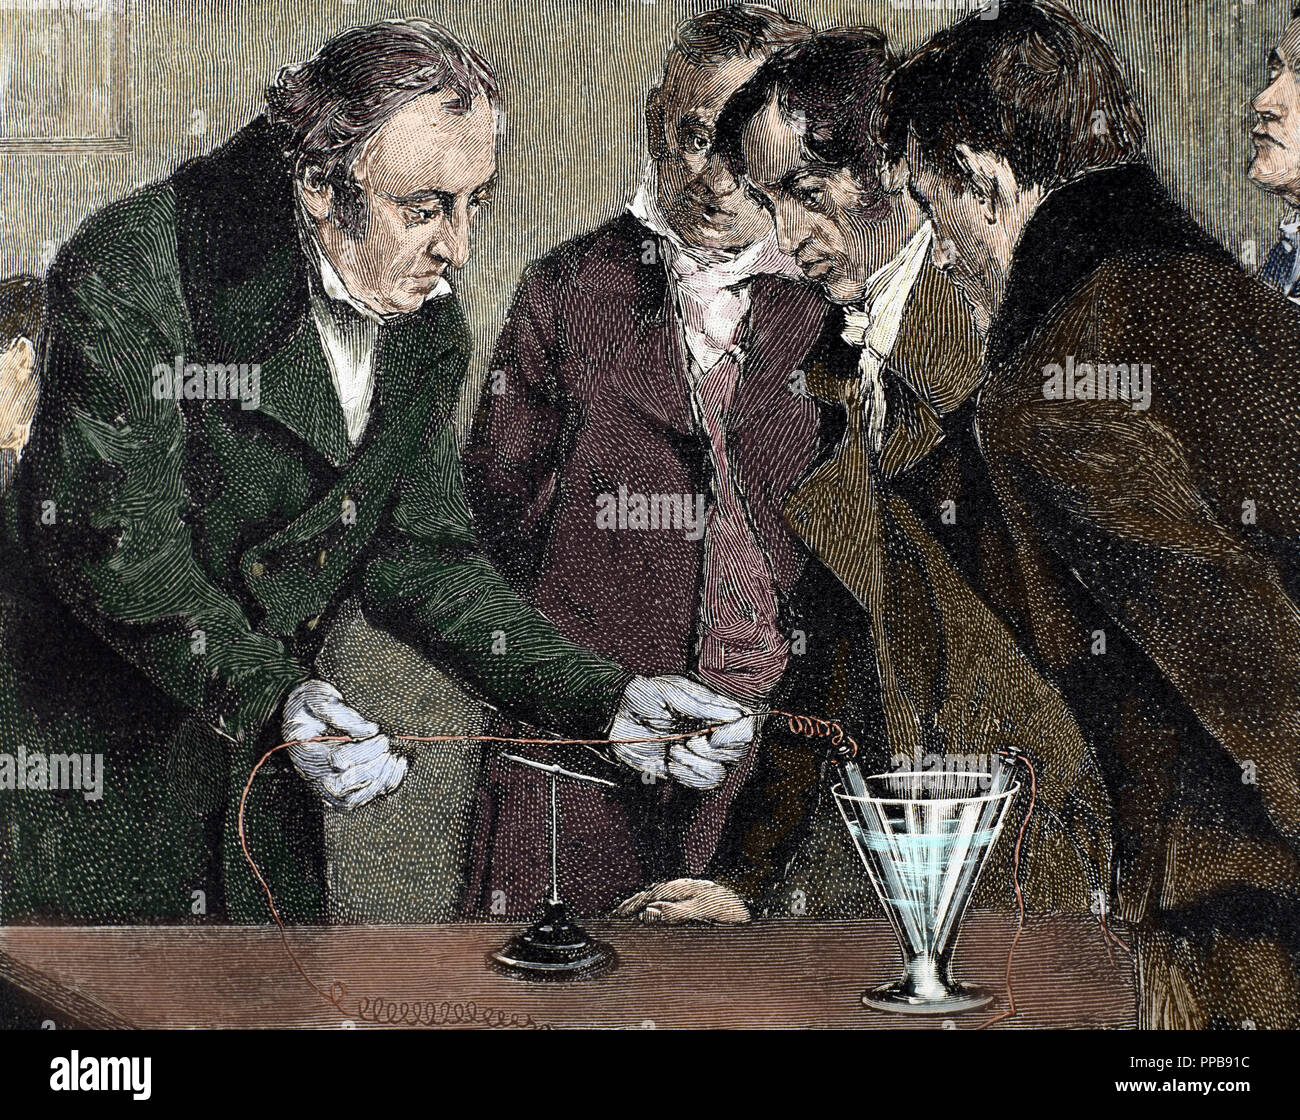 Oersted, Hans Christian (Copenhagen Rudkobing ,1777-1851). Danish physicist   and chemist. Oersted discovers electromagnetism. Colored engraving. Stock Photo